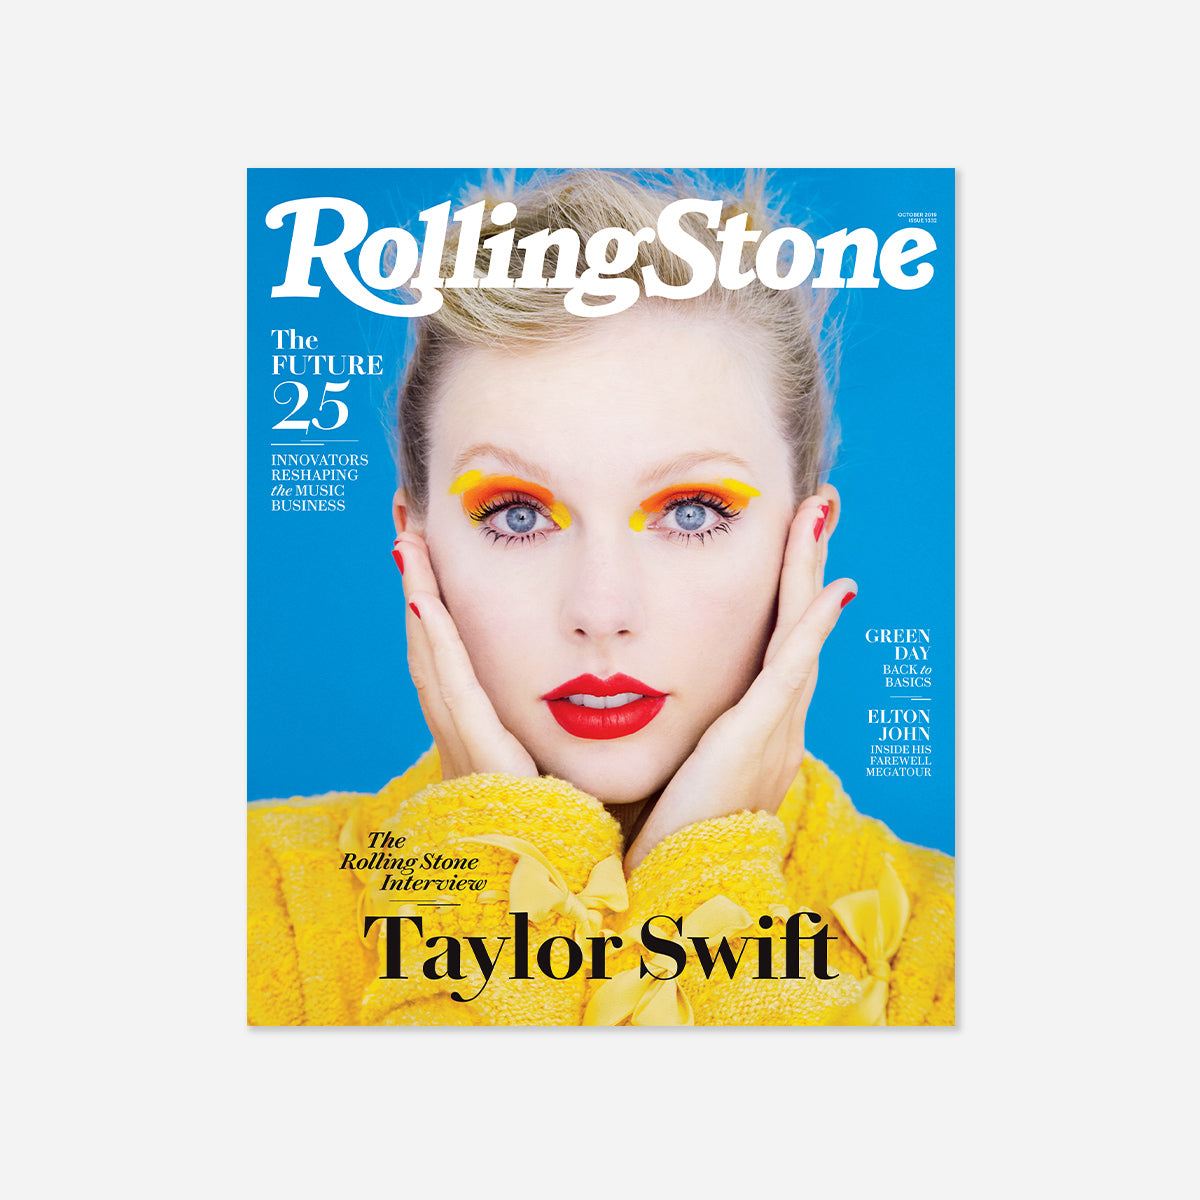 Rolling Stone Magazine October 2019 Featuring Taylor Swift (Issue 1332)